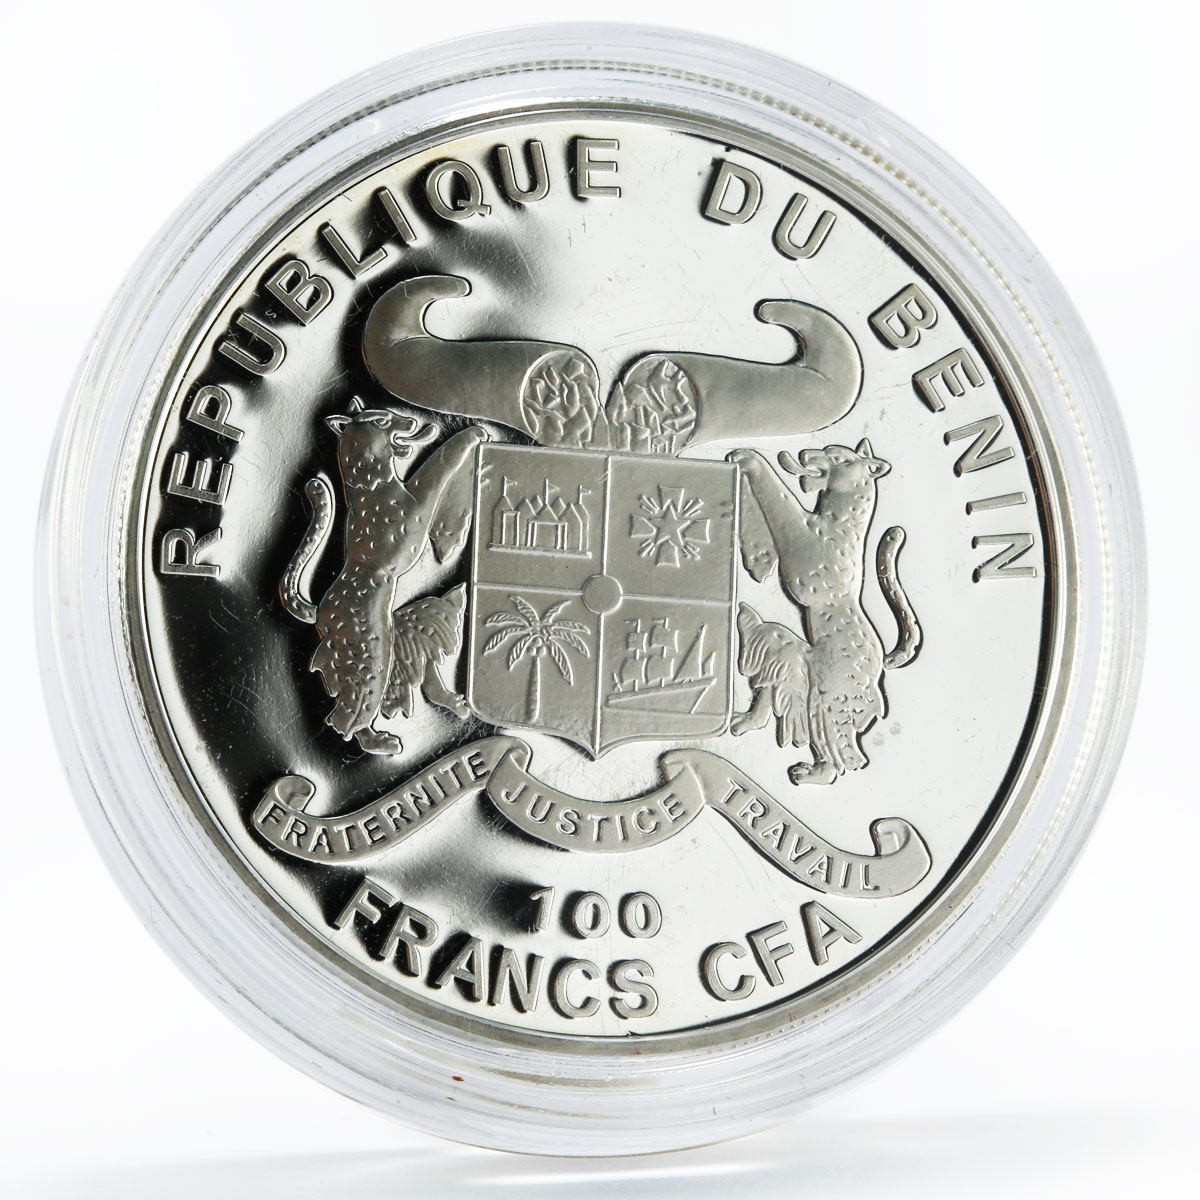 Benin 100 francs Famous World Plants series The Rose colored silver coin 2011